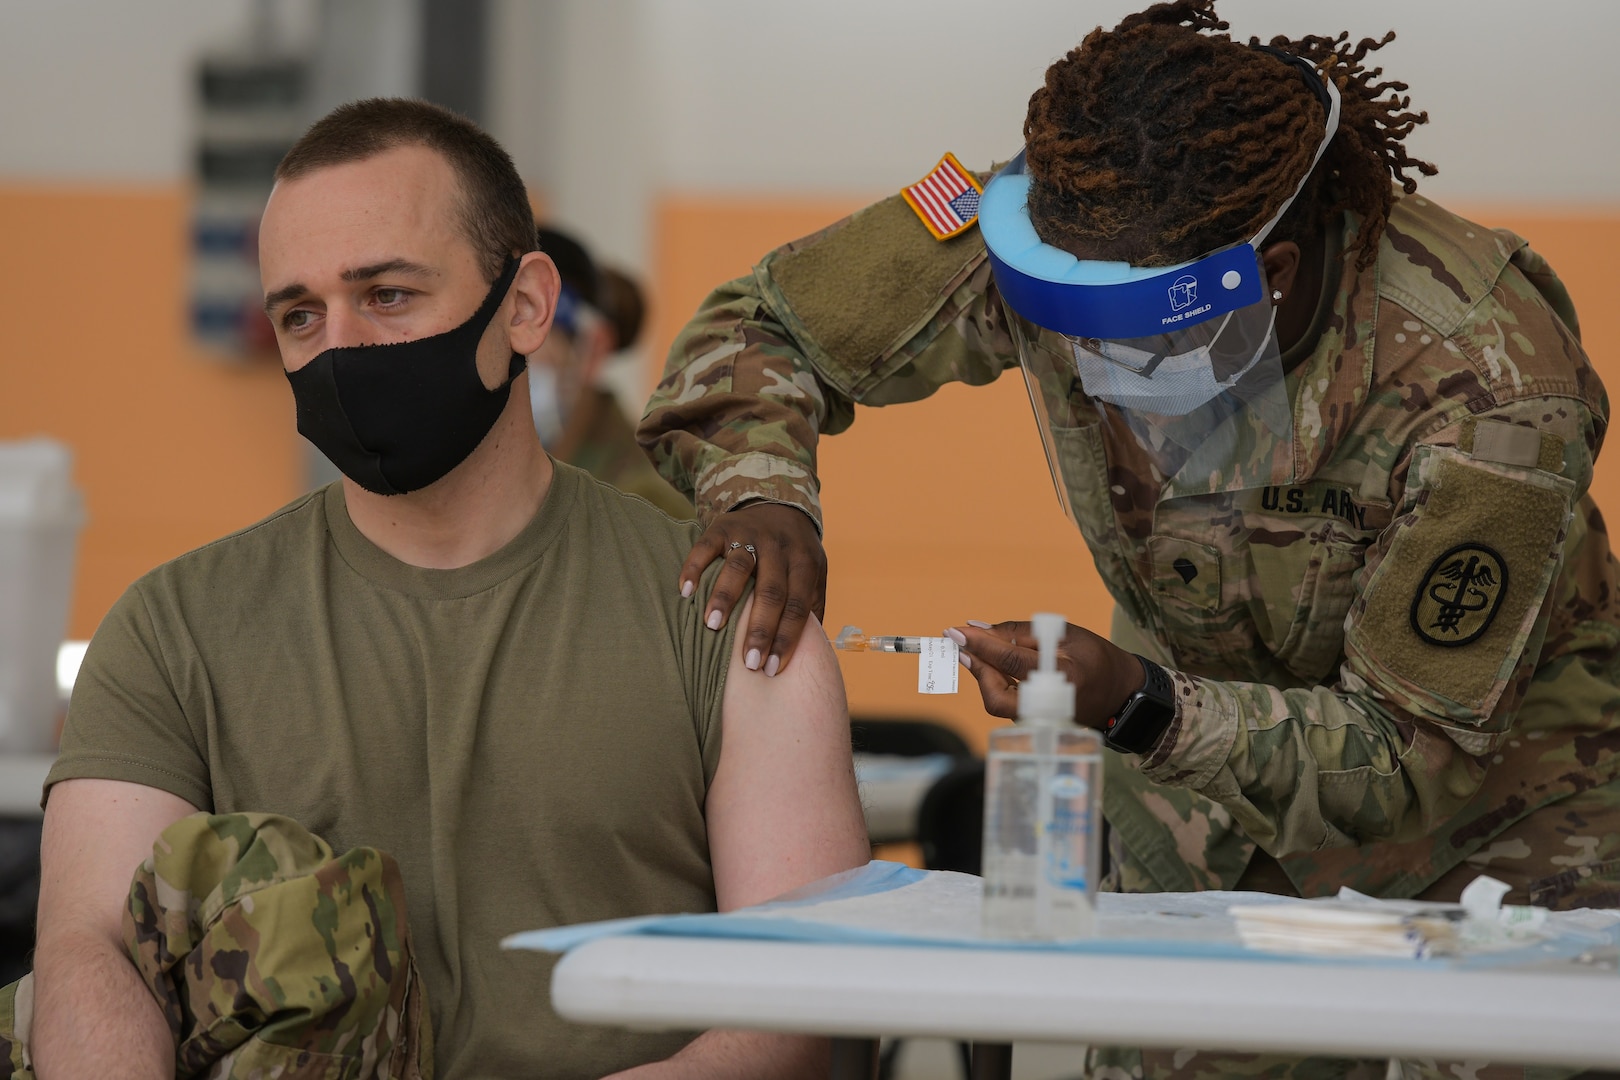 U.S. Army Cpl. Michael Lesser, left, with 3rd Squadron, 2nd Cavalry Regiment, receives a COVID-19 vaccination at the 7th Army Training Command's (7ATC) Rose Barracks, Vilseck, Germany, May 3, 2021. The U.S. Army Health Clinics at Grafenwoehr and Vilseck conducted a "One Community" COVID-19 vaccine drive May 3-7 to provide thousands of appointments to the 7ATC community of Soldiers, spouses, Department of the Army civilians, veterans and local nationals employed by the U.S. Army.